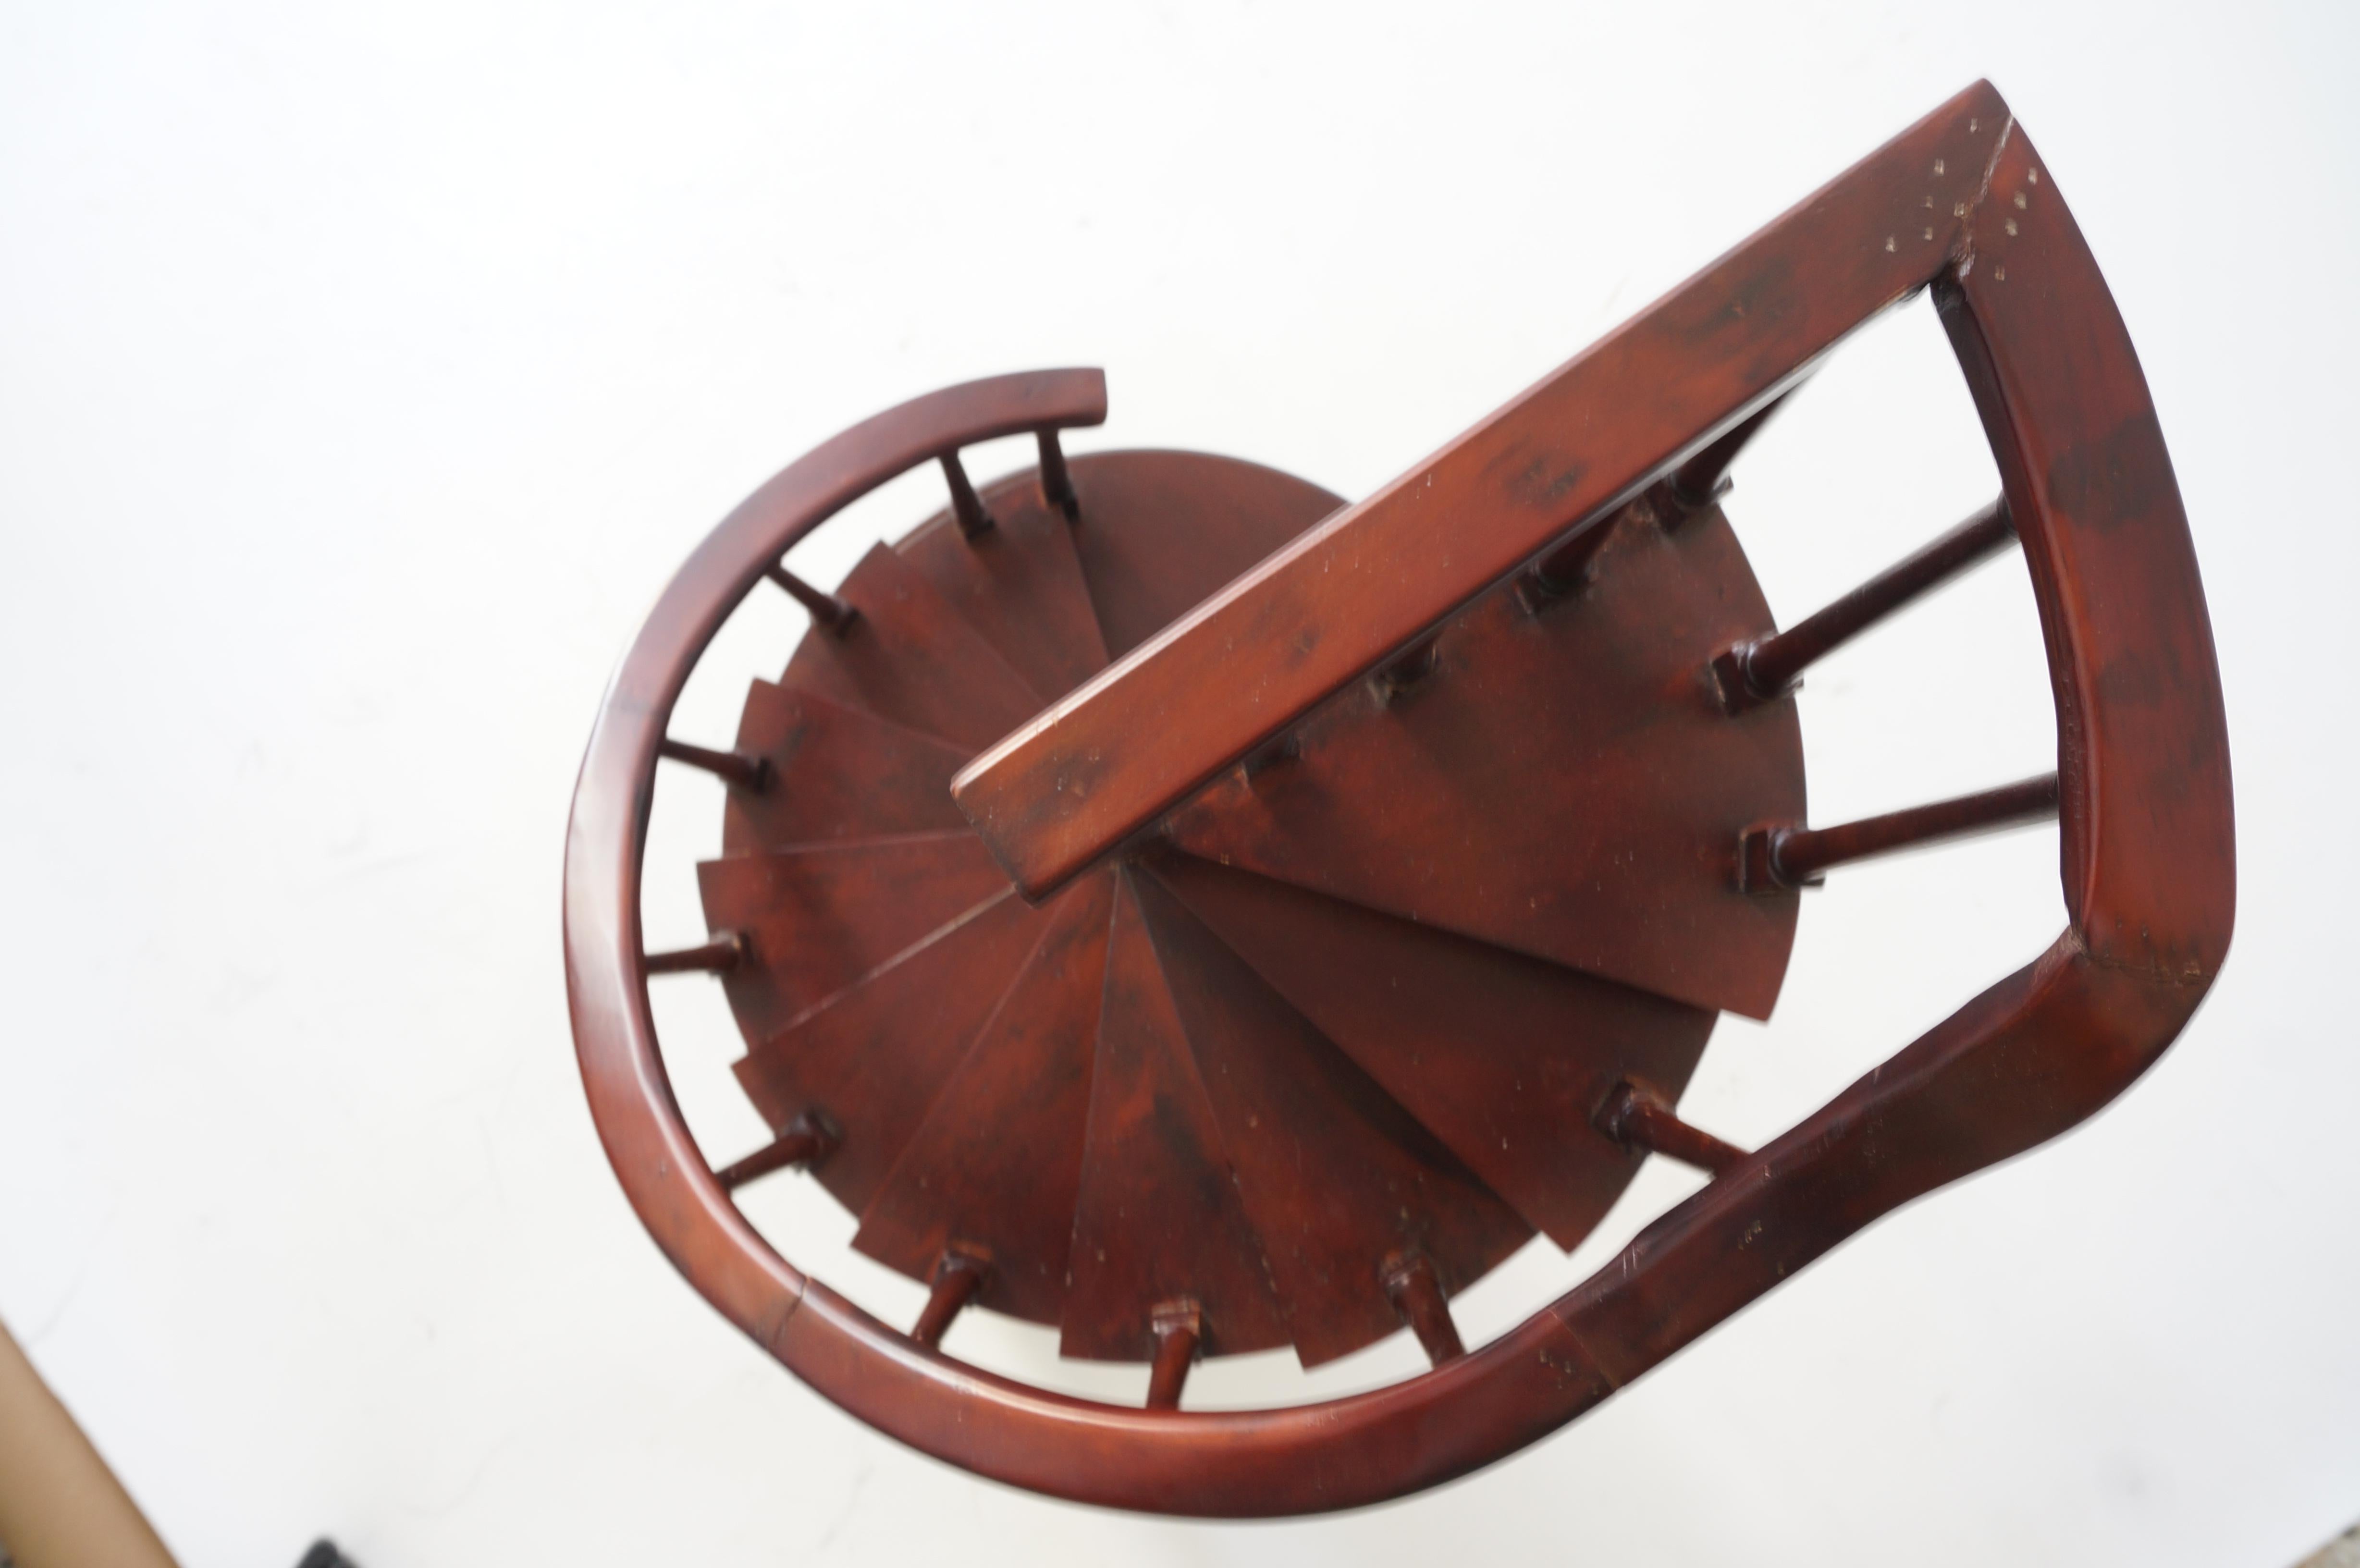 20th Century Spiral Staircase Architectural Model in Mahogany